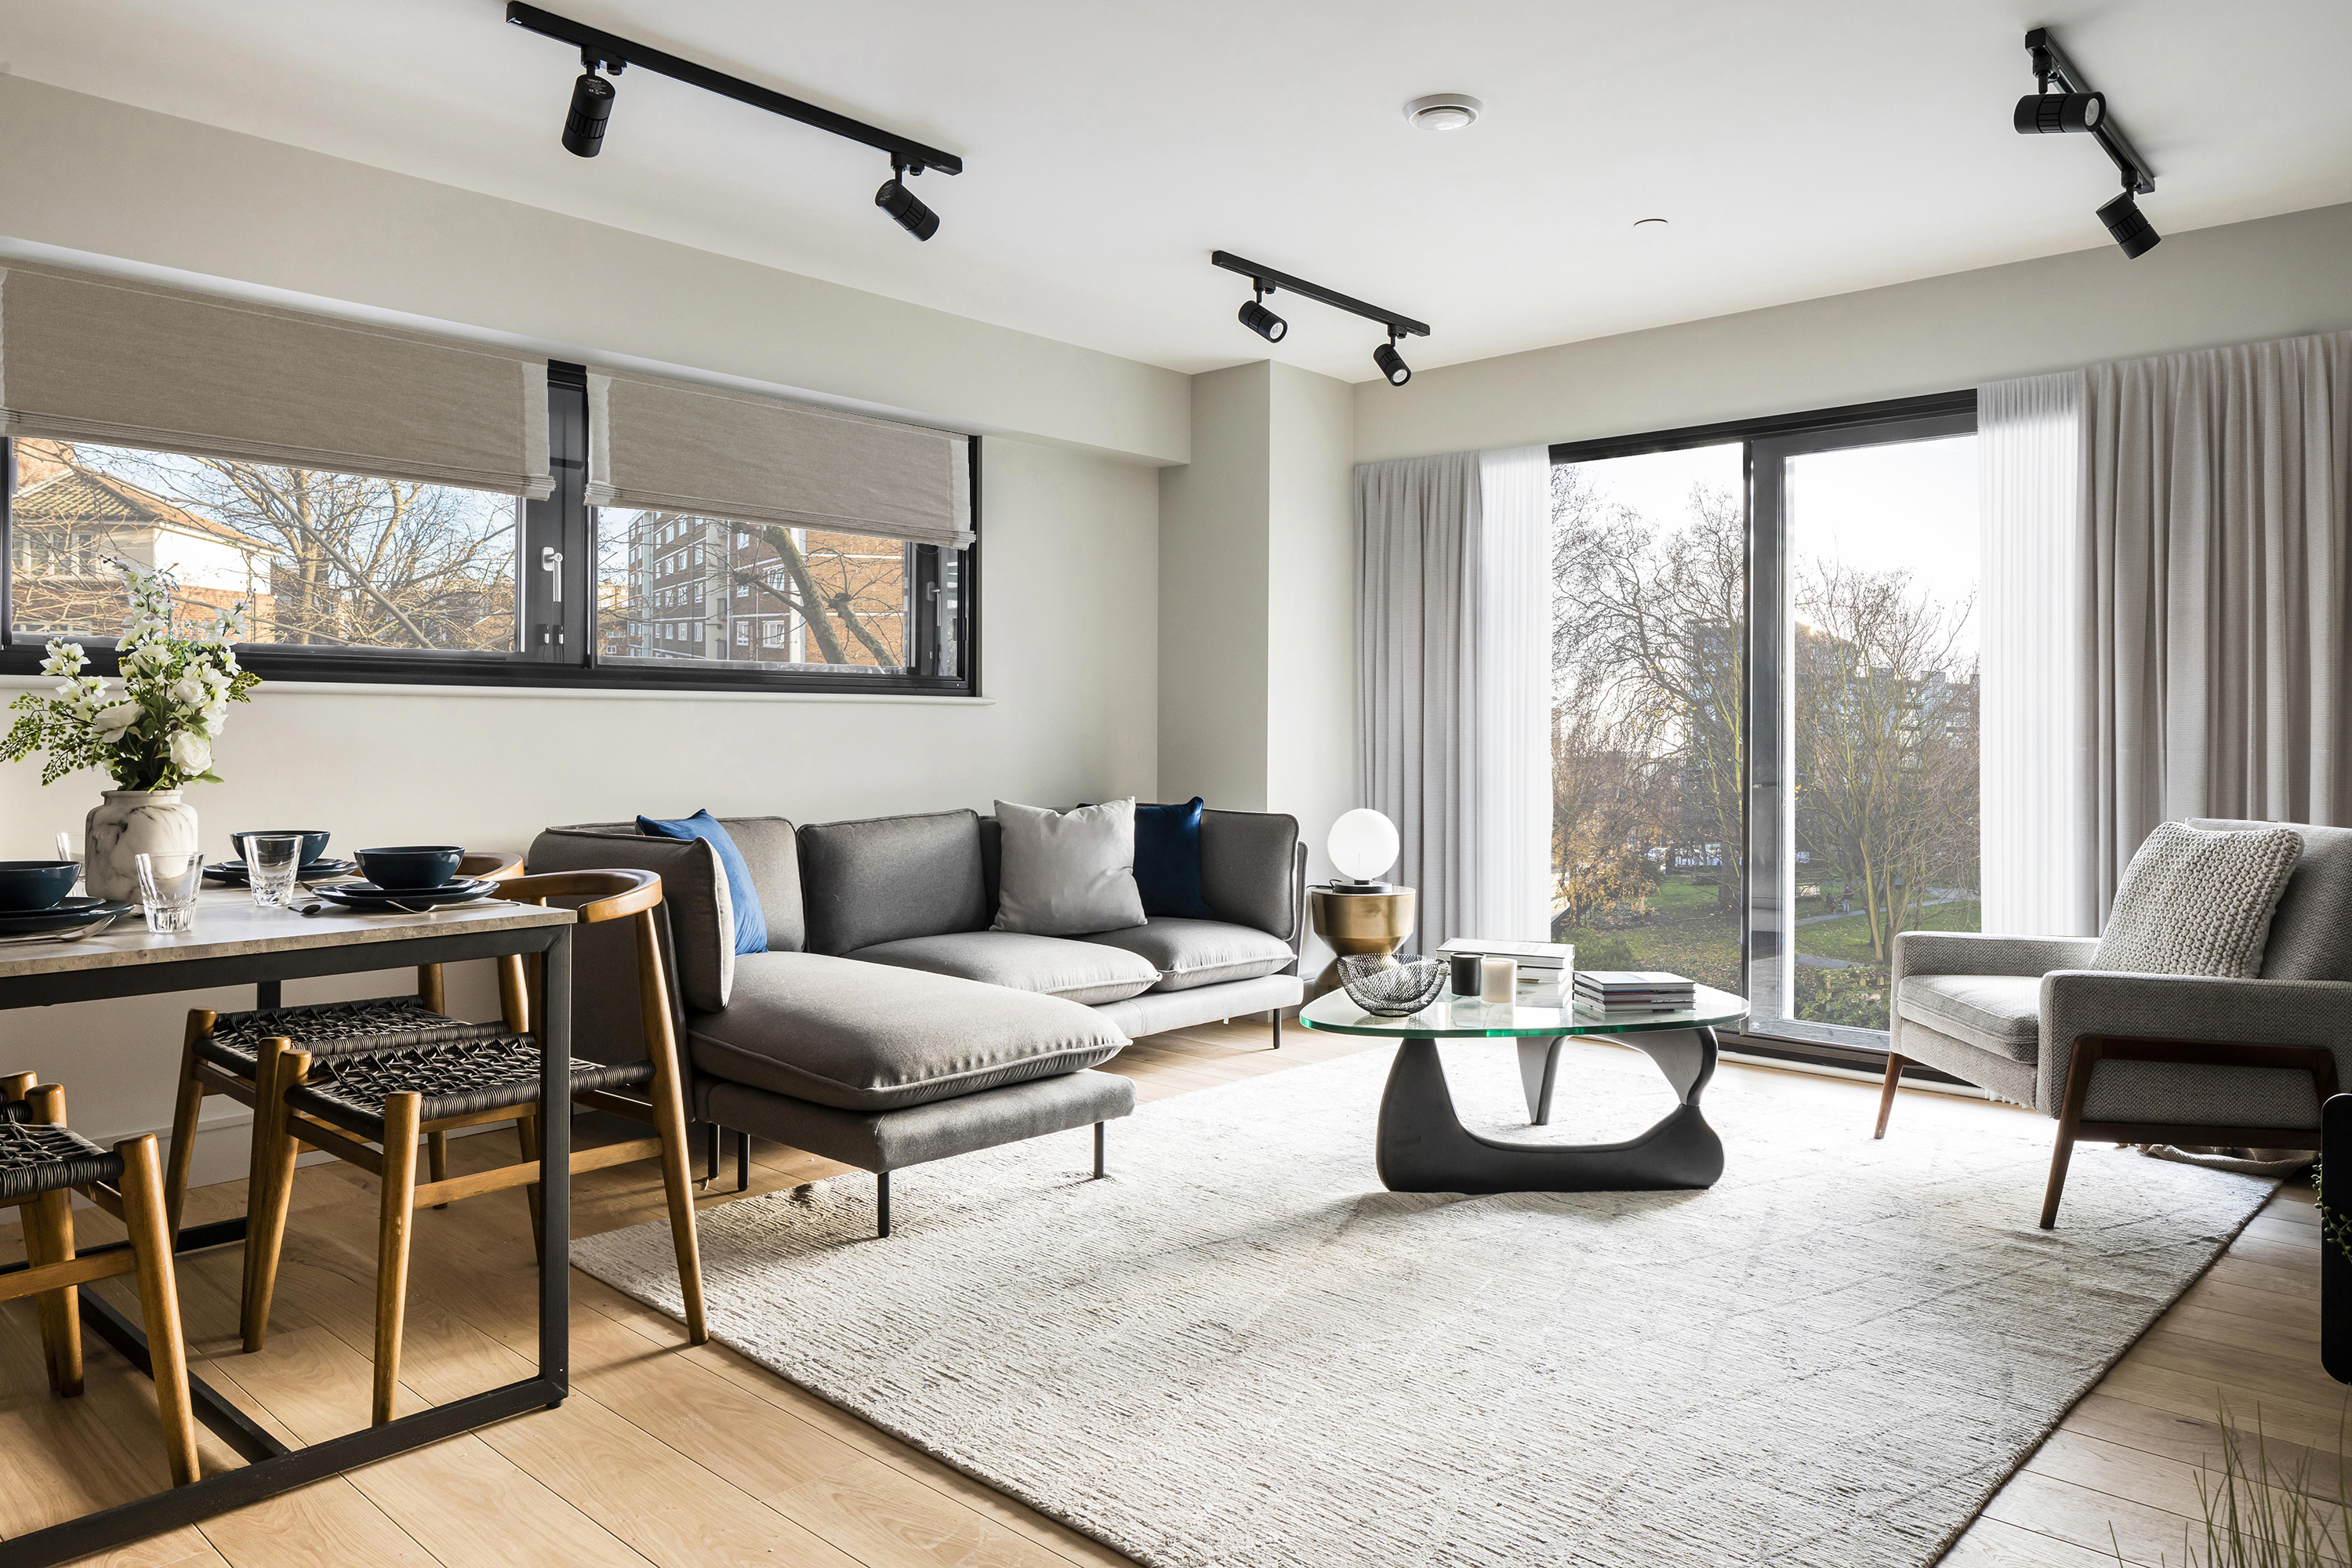 An open-plan living area at Newham's Yard.